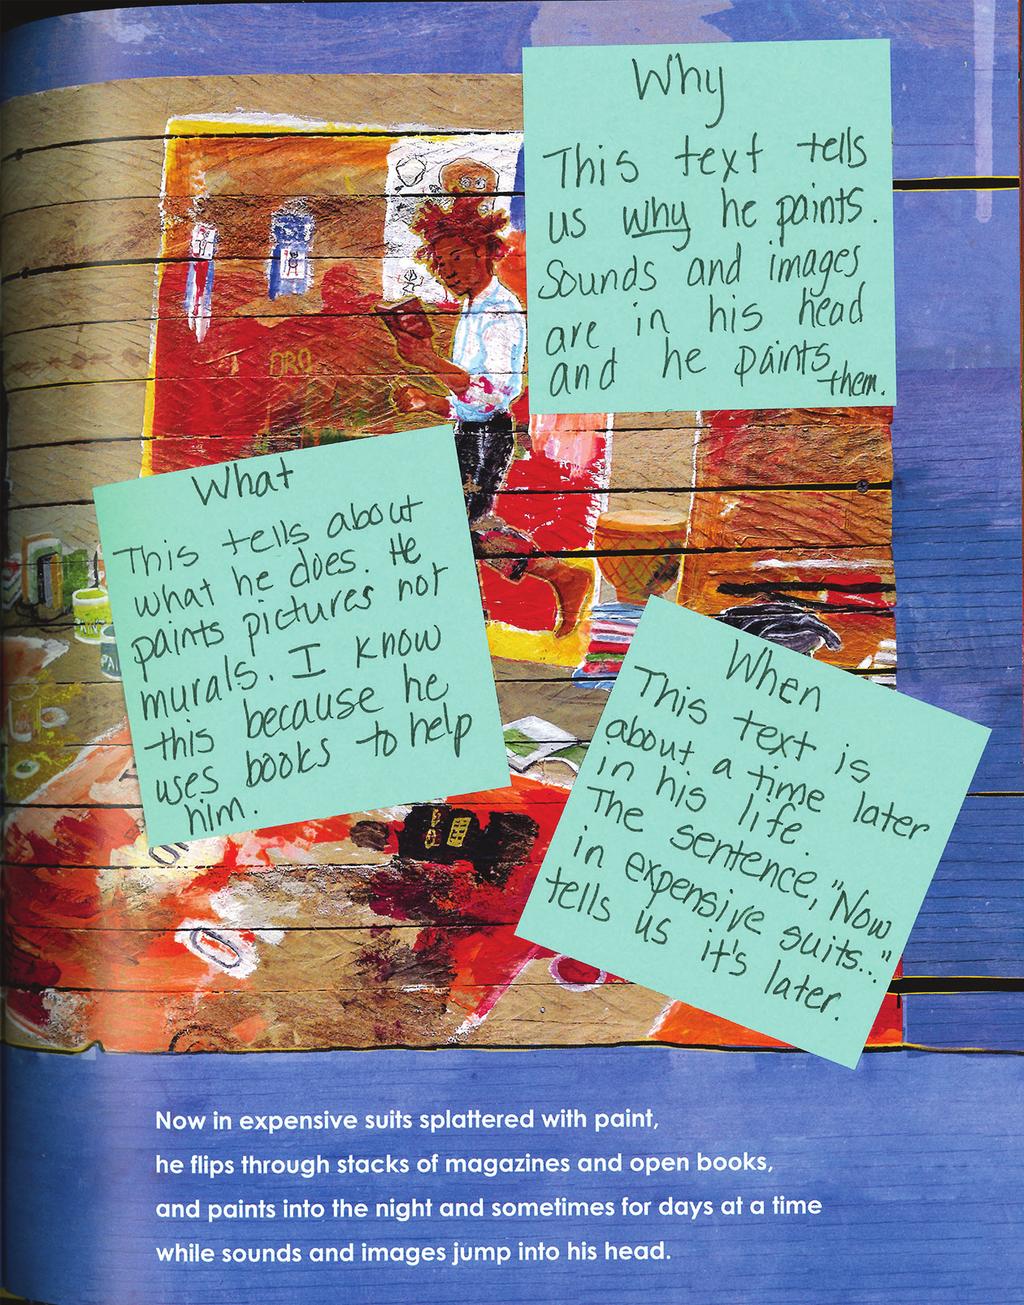 1 A New Spin on Who, What, Why, When, and Where The other day, I was in a classroom and students were WHEN YOU MIGHT OFFER IT You might offer this task when younger readers are ready to dig into